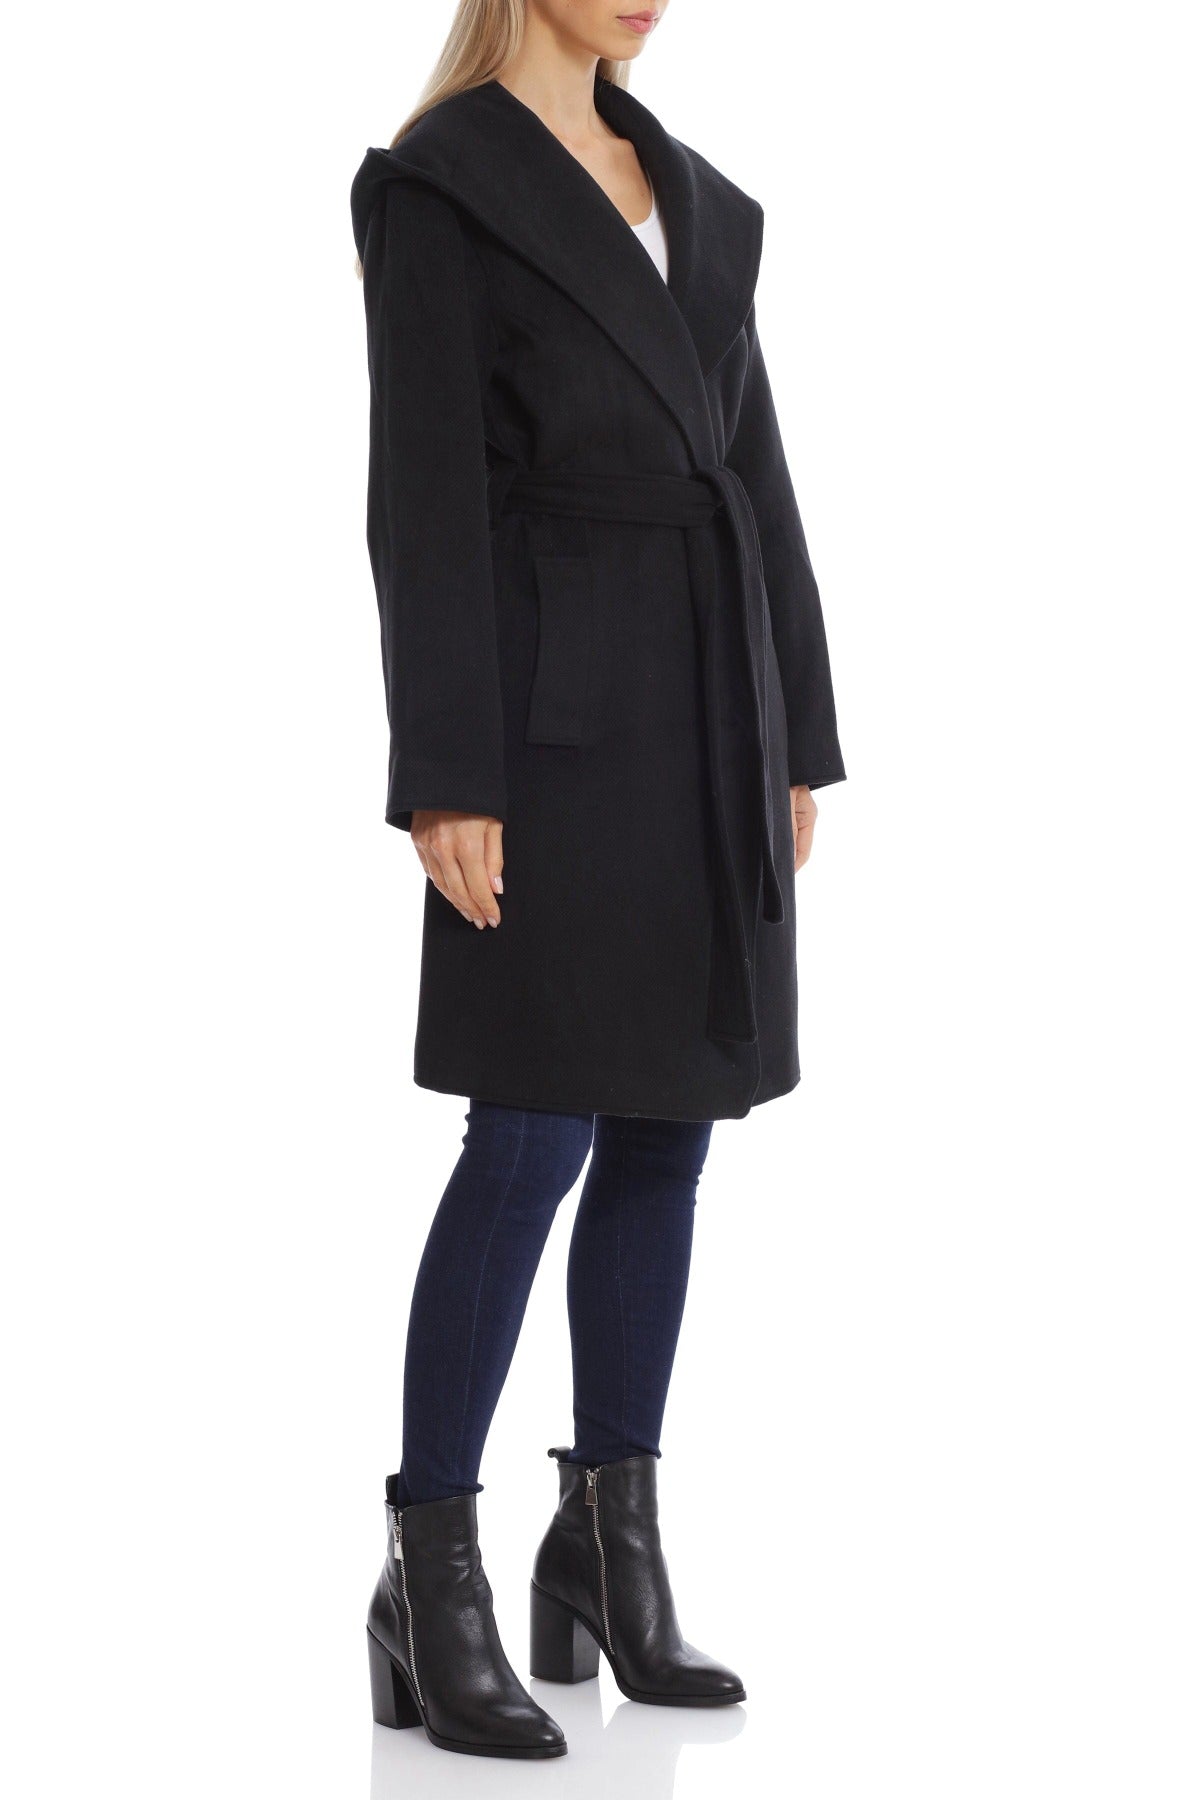 Black hooded wool-blend belted midi coat jacket - women's figure flattering coats jackets outerwear for Fall fashion trends by Avec Les Filles